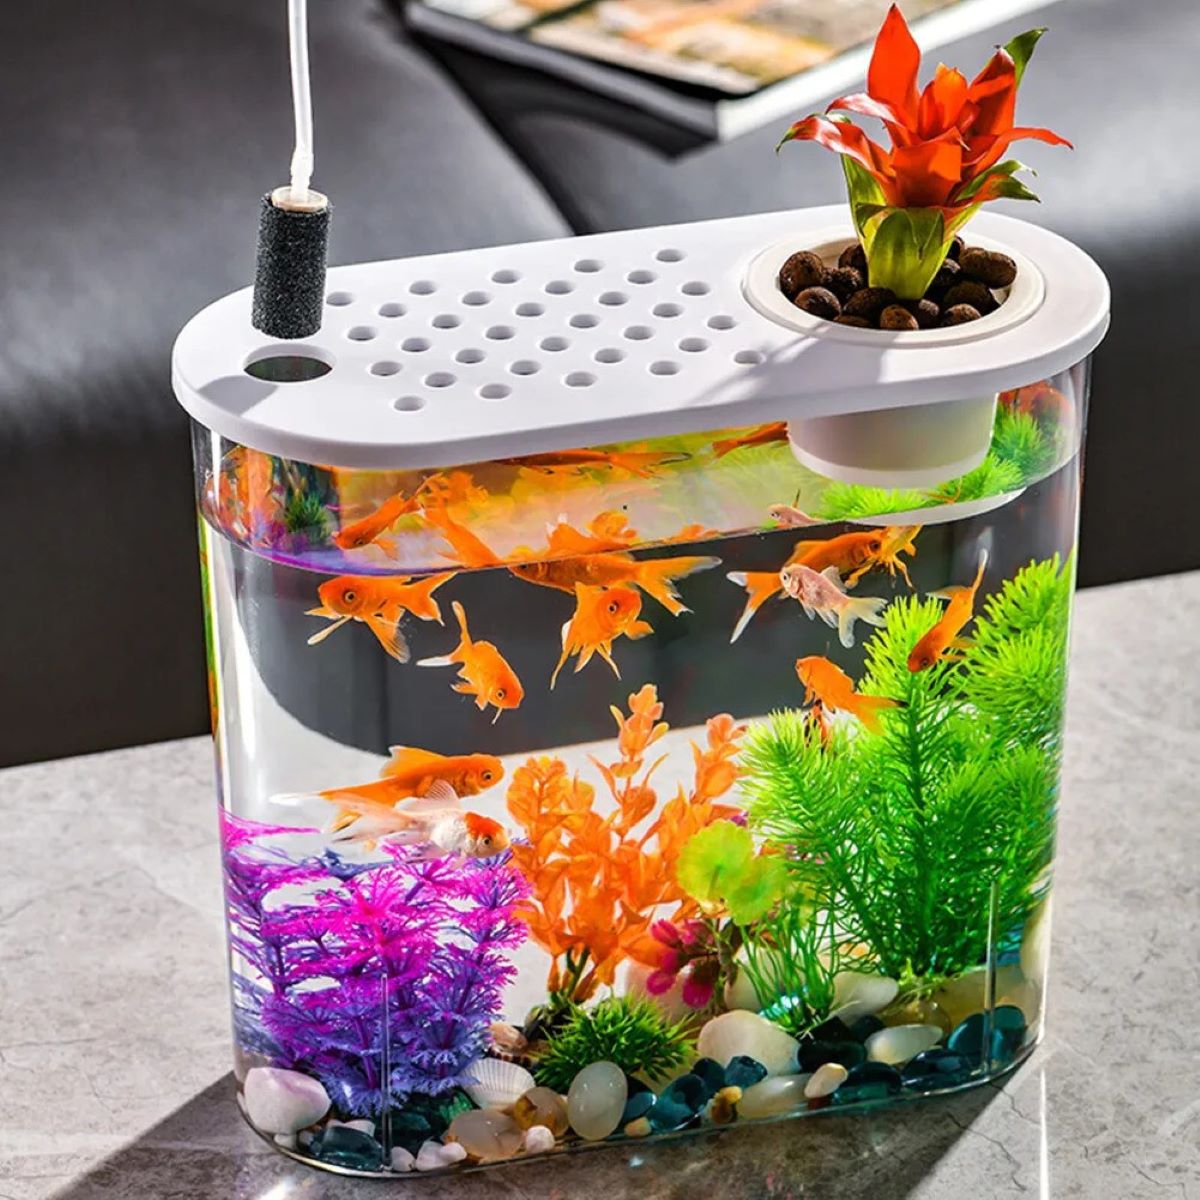 How To Make Fish Tank At Home Without Glass